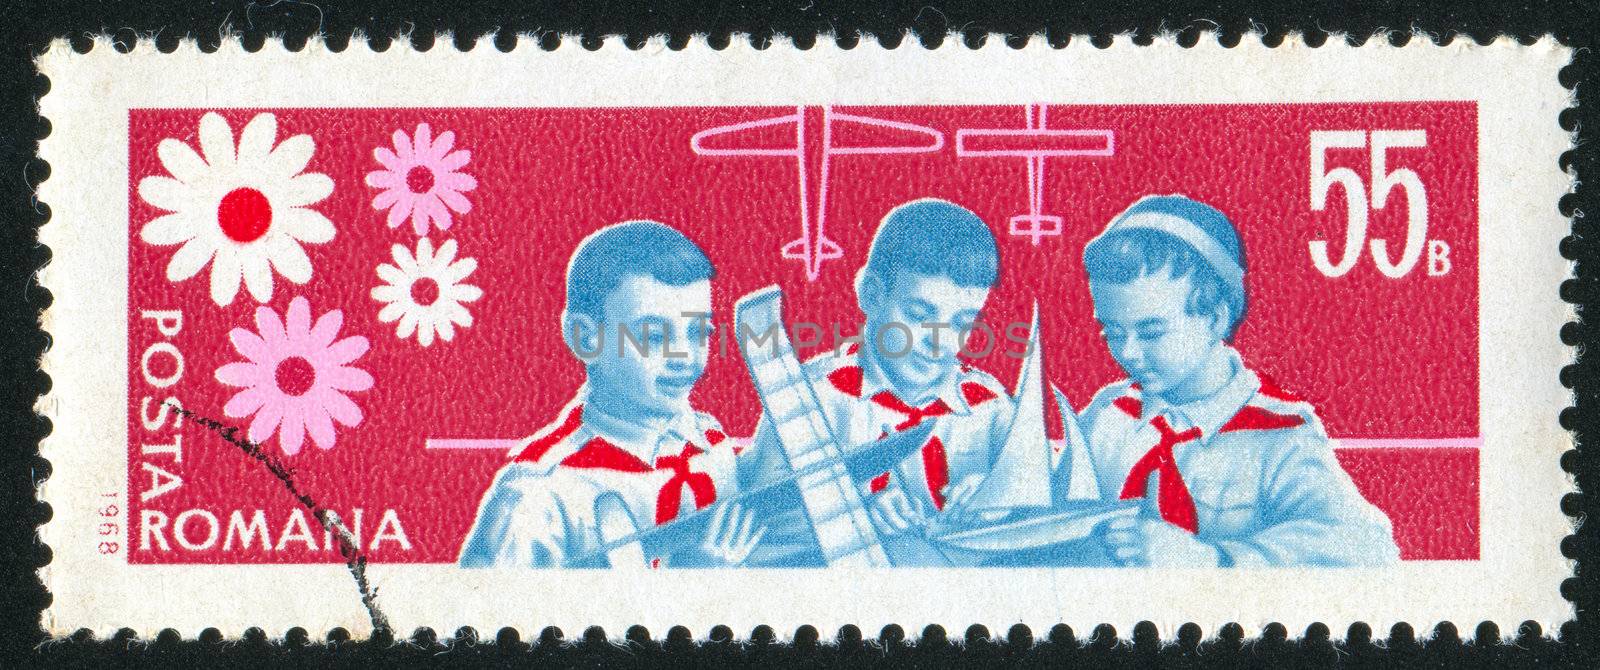 ROMANIA - CIRCA 1968: stamp printed by Romania, shows pioneer building model of plane and boat, circa 1968